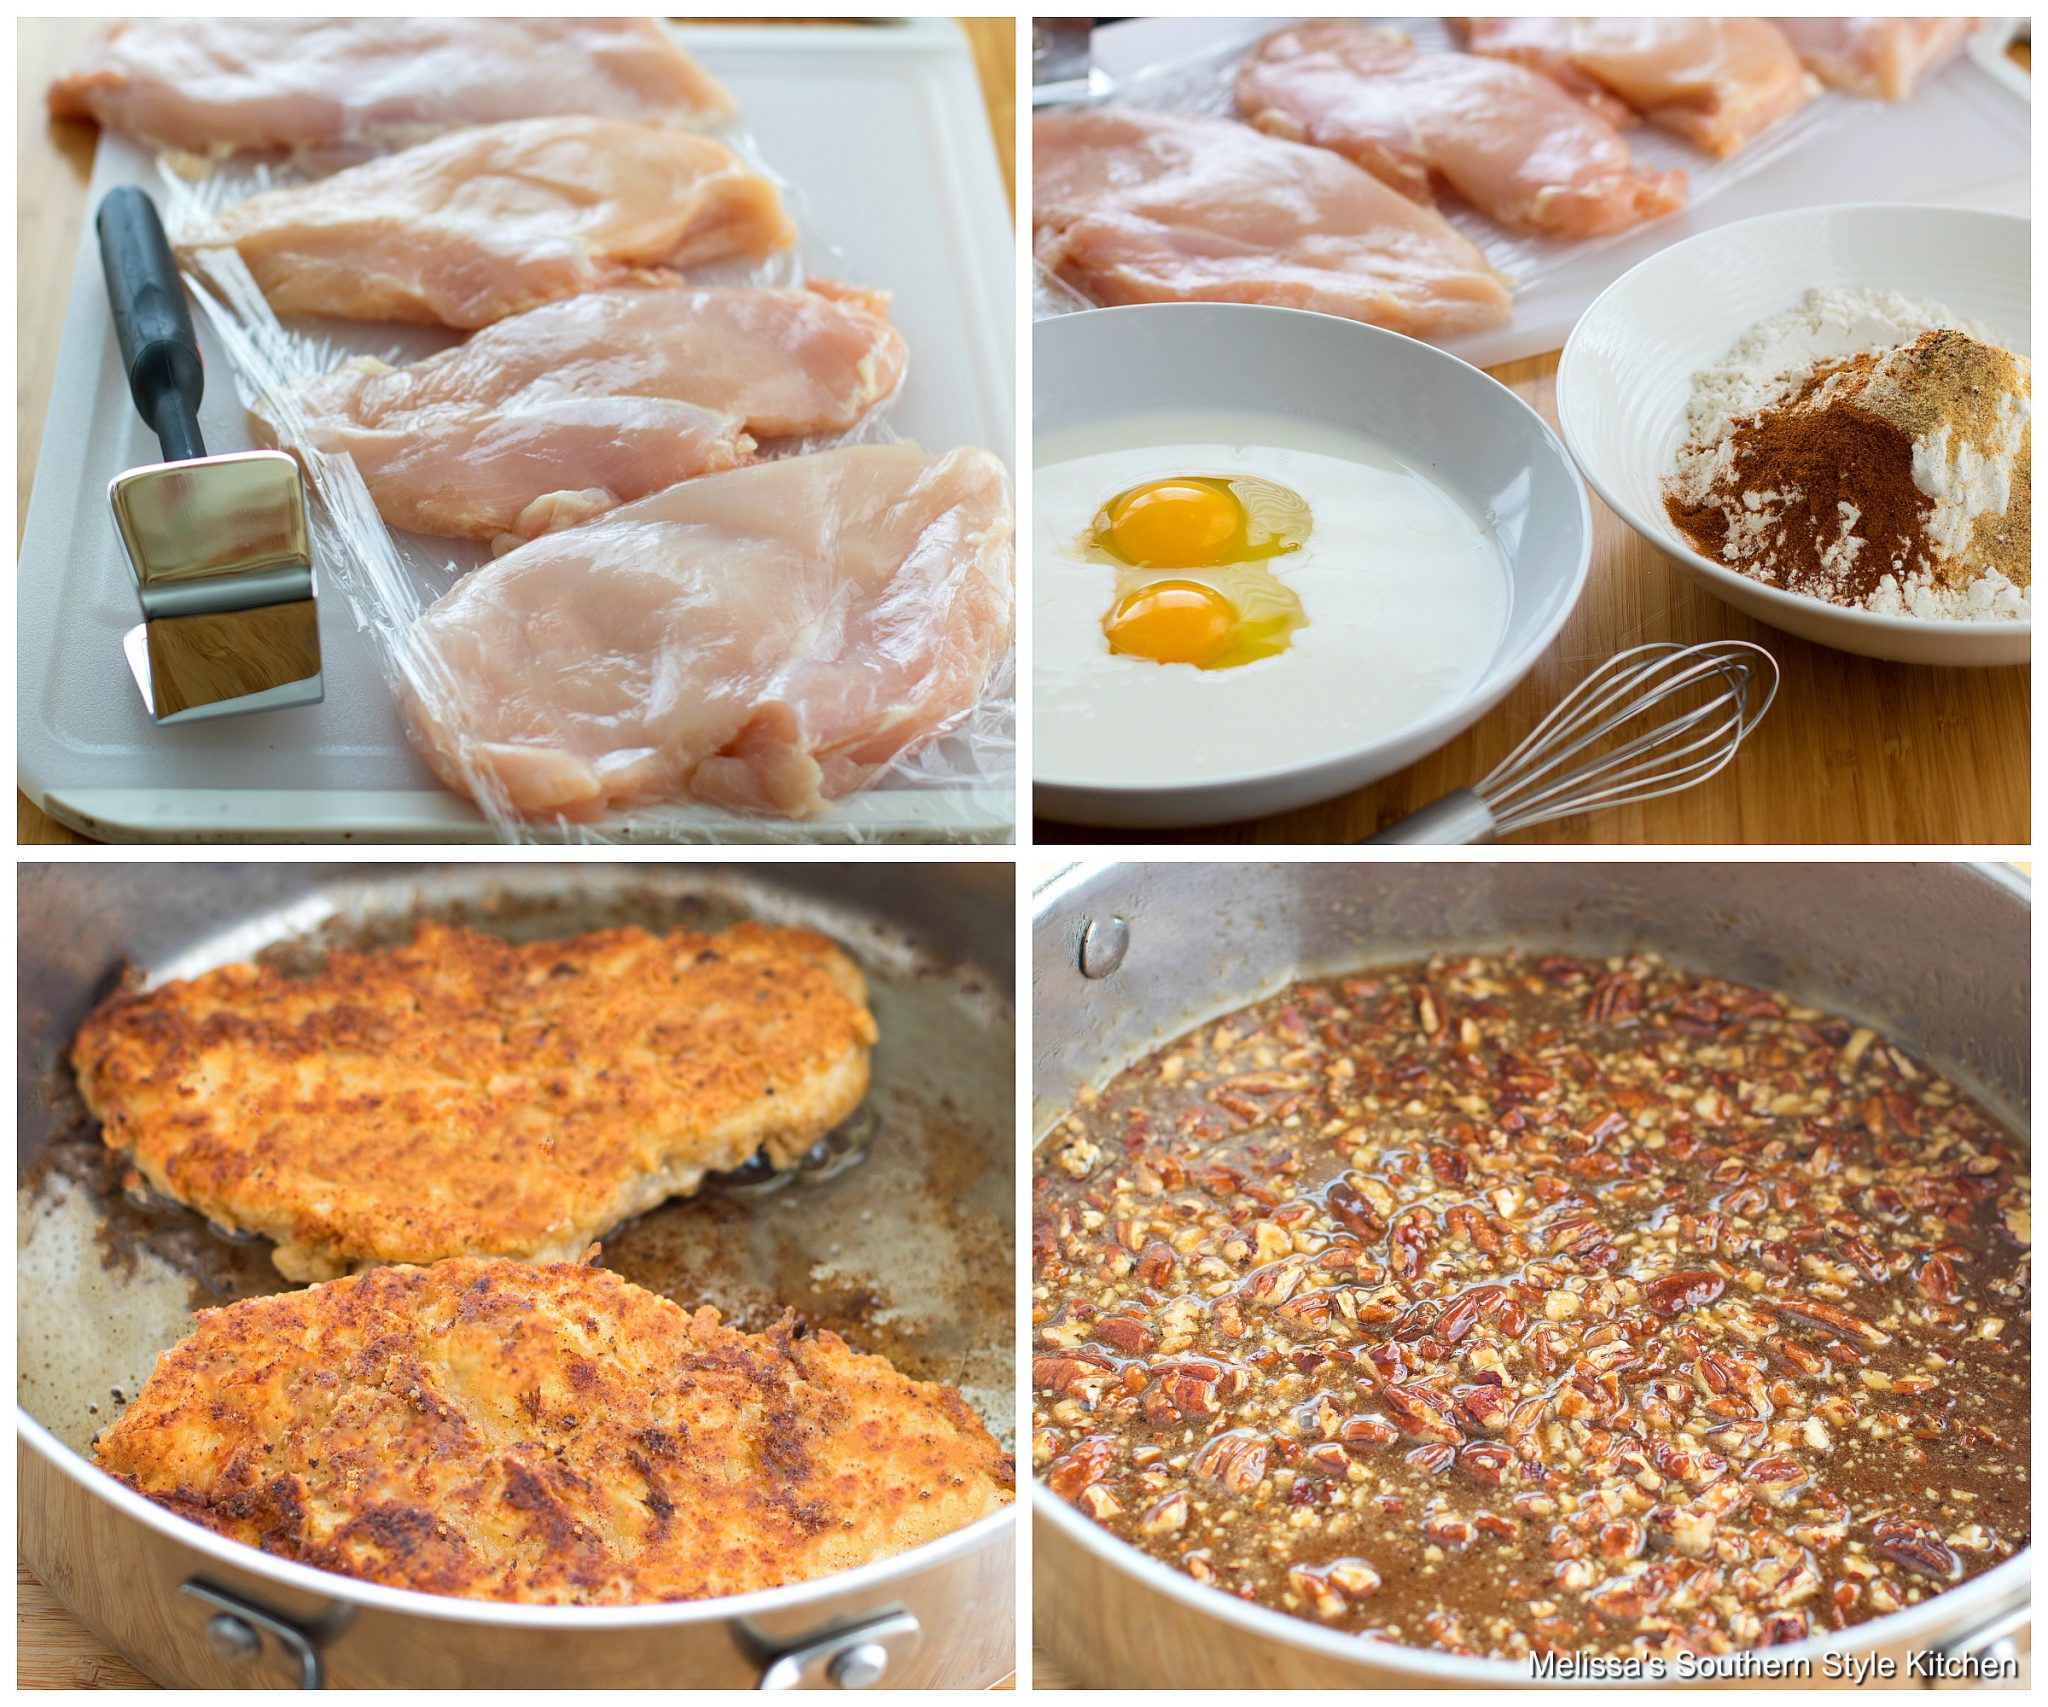 Step-by-step preparation images for honey pecan chicken